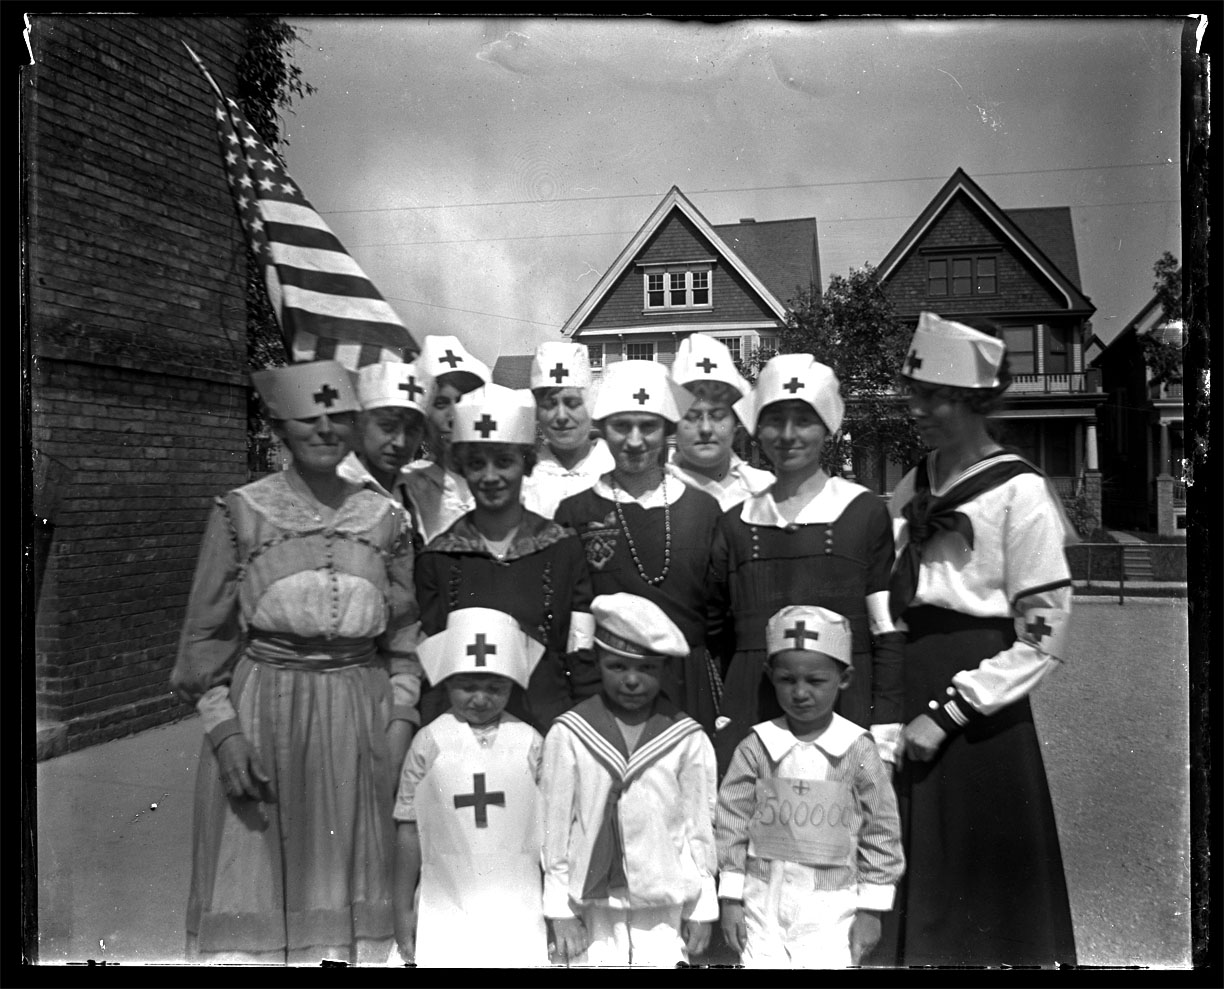 The Red Cross Volunteers C.1910 from original 5x7 glass plate negative